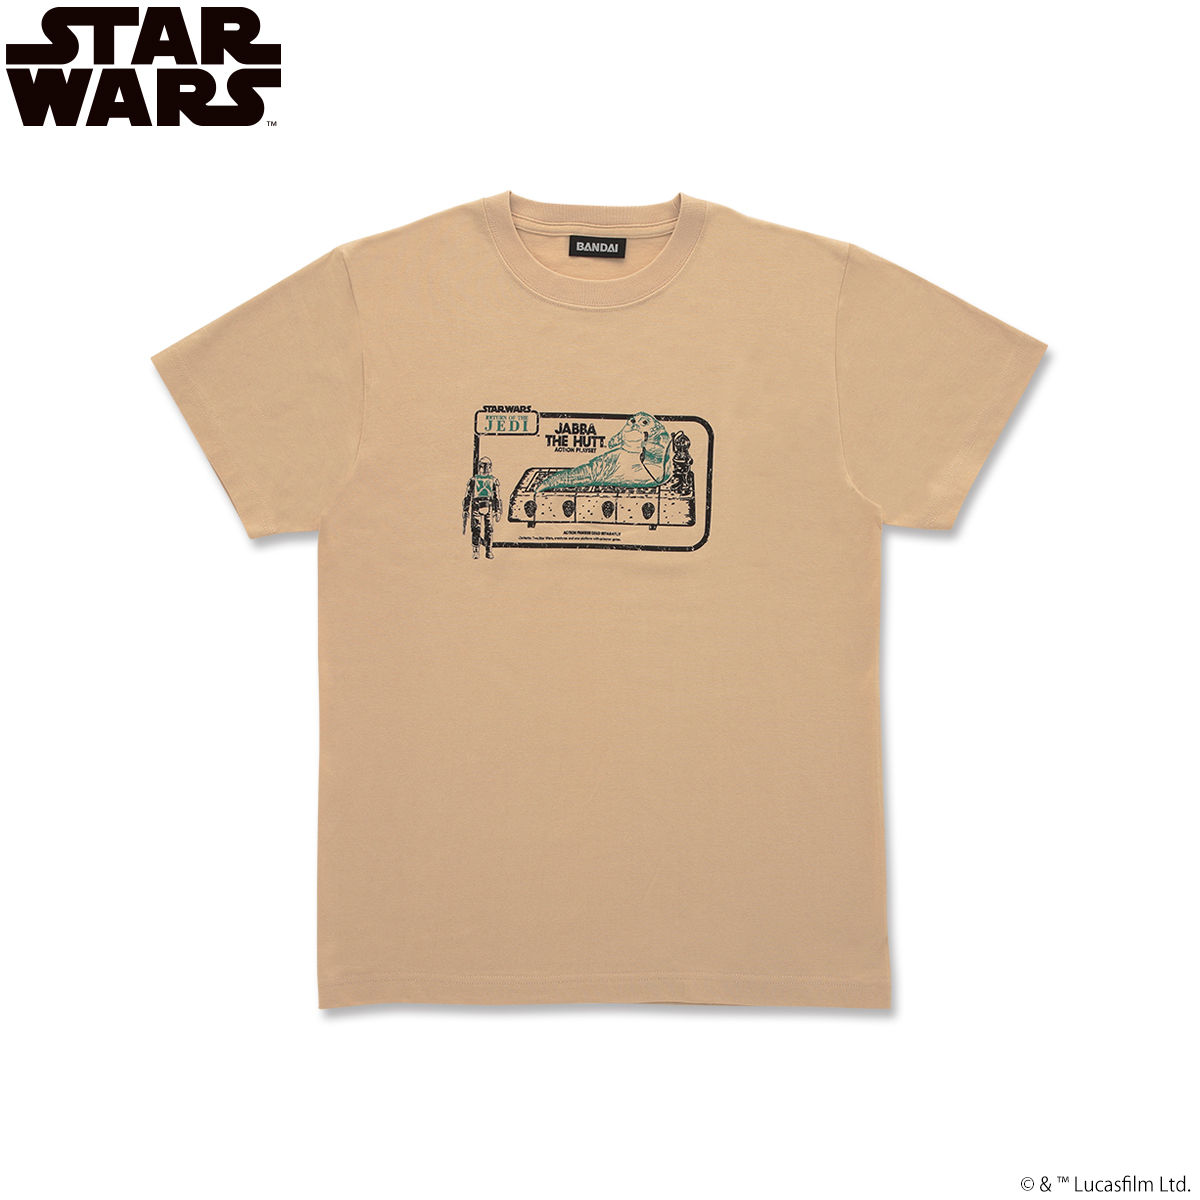 STAR WARS TOY Tシャツ ボバ・フェット＆ジャバ・ザ・ハット